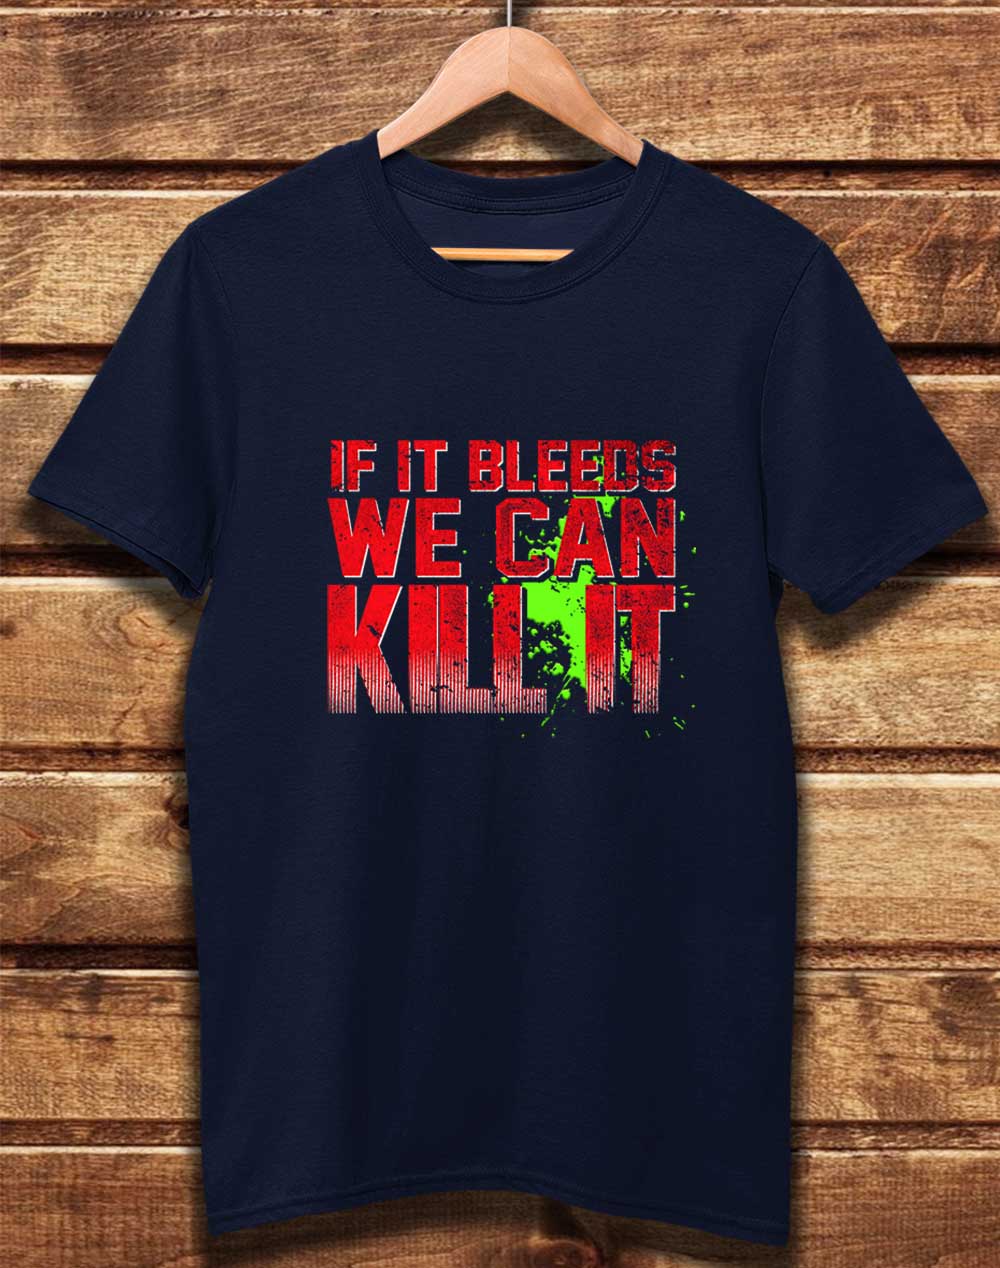 Navy - DELUXE If It Bleeds We Can Kill It Organic Cotton T-Shirt